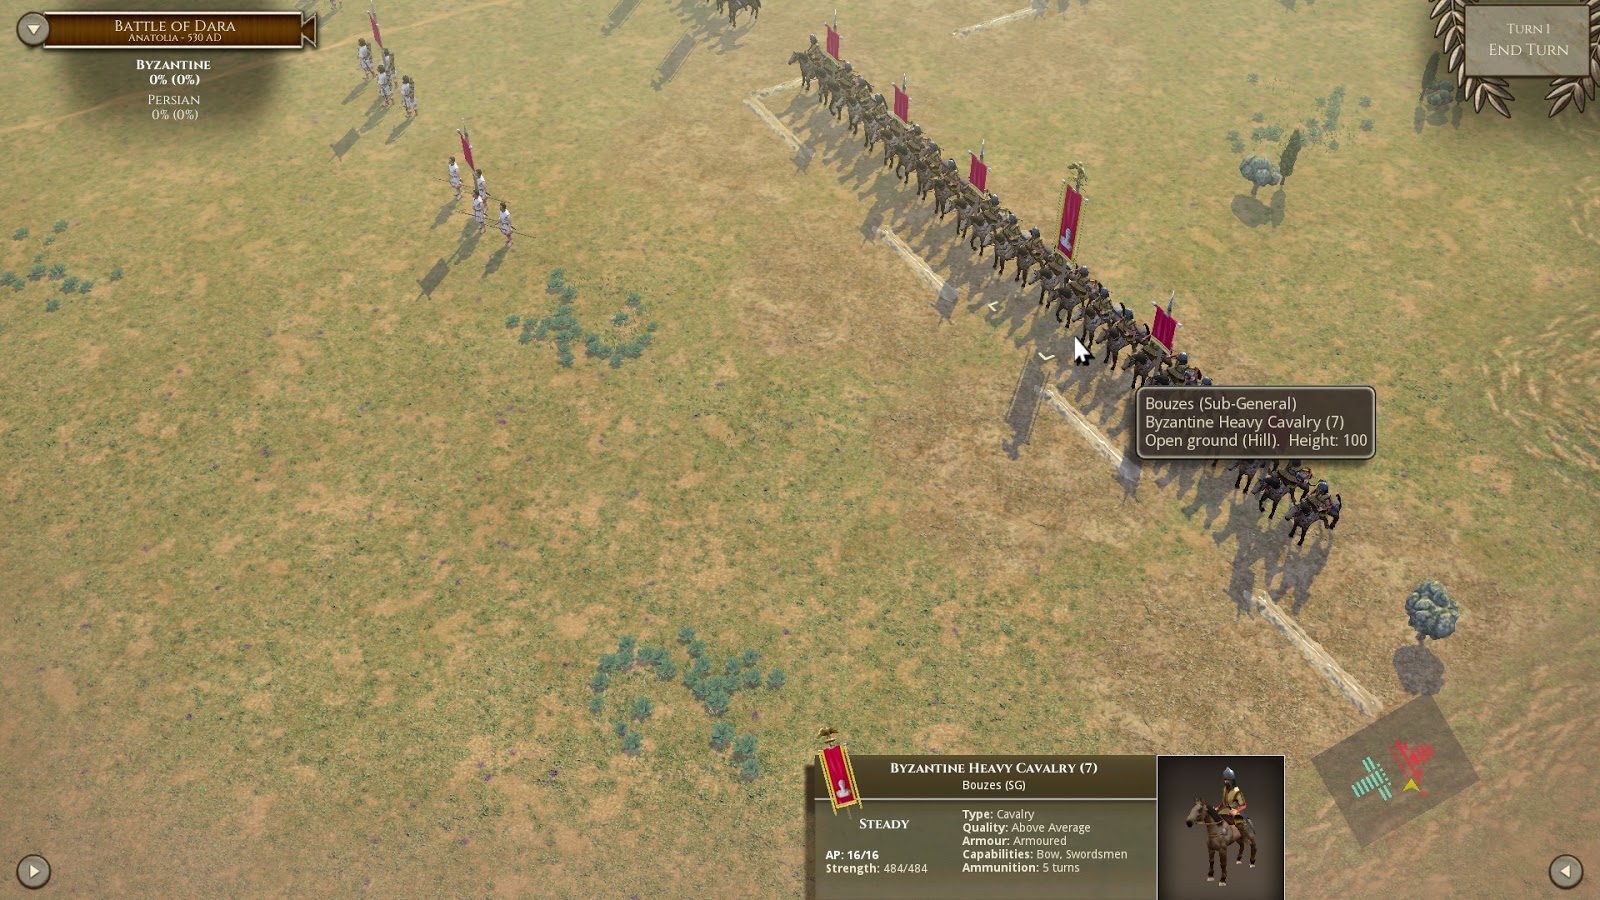 Can you be the King of the Hill? New mode in Empires Apart! - Slitherine